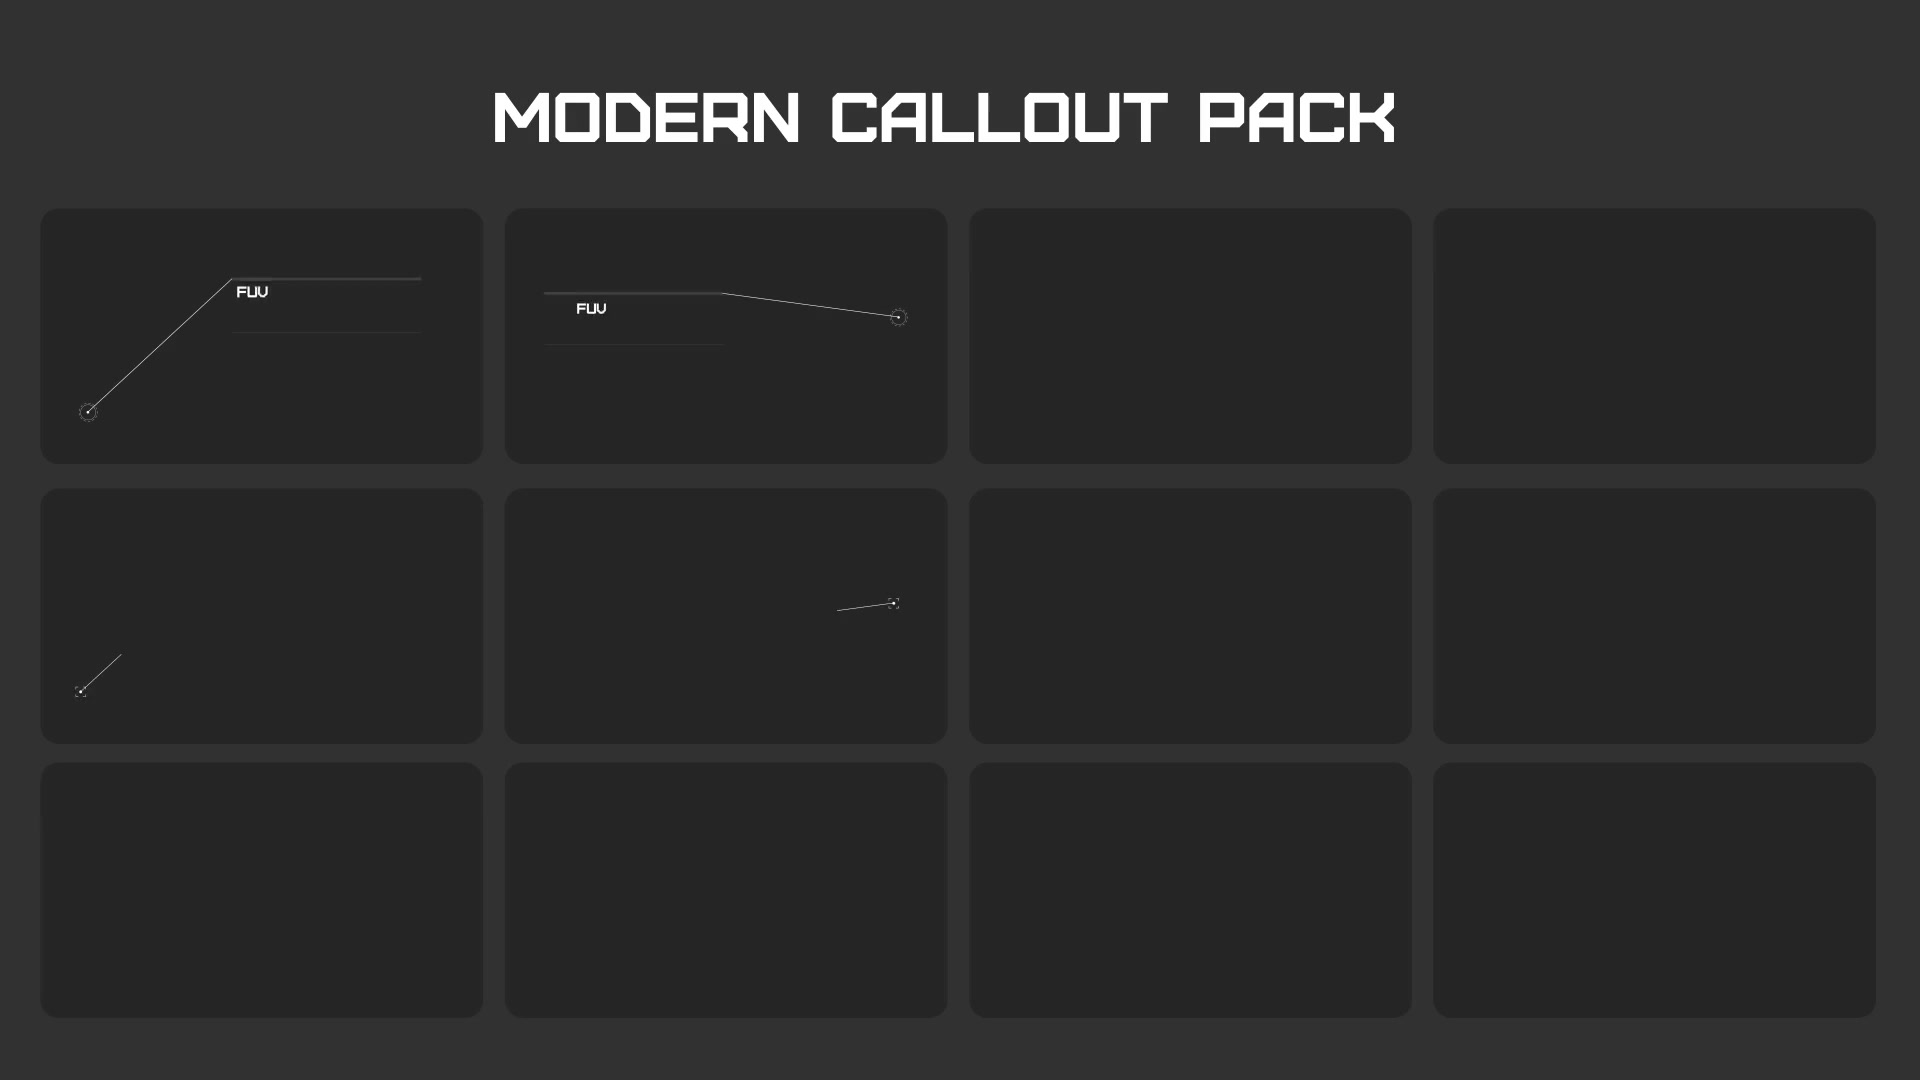 Modern Callout Packs - Download Videohive 22644998